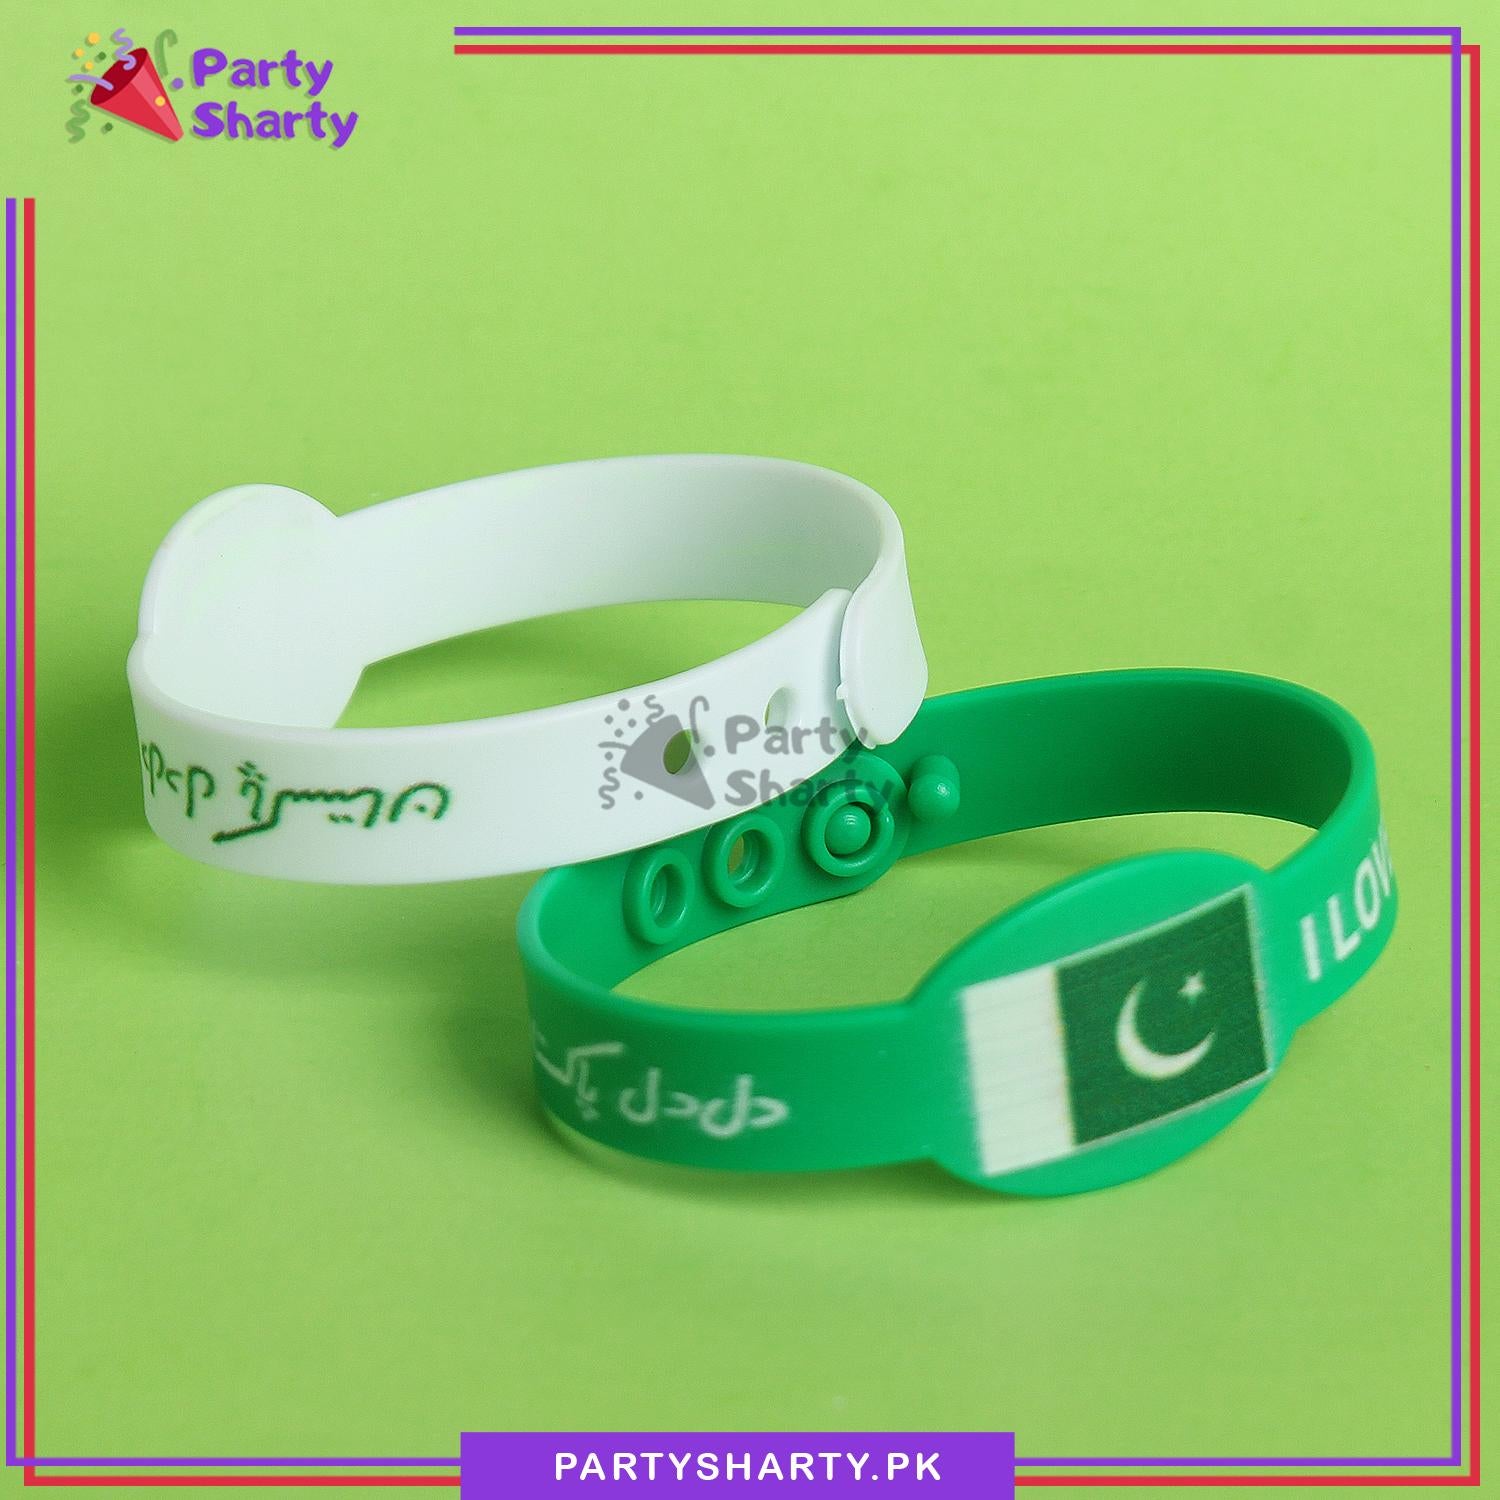 14th August Pakistan Flag Hand Band For Independence Day Celebration